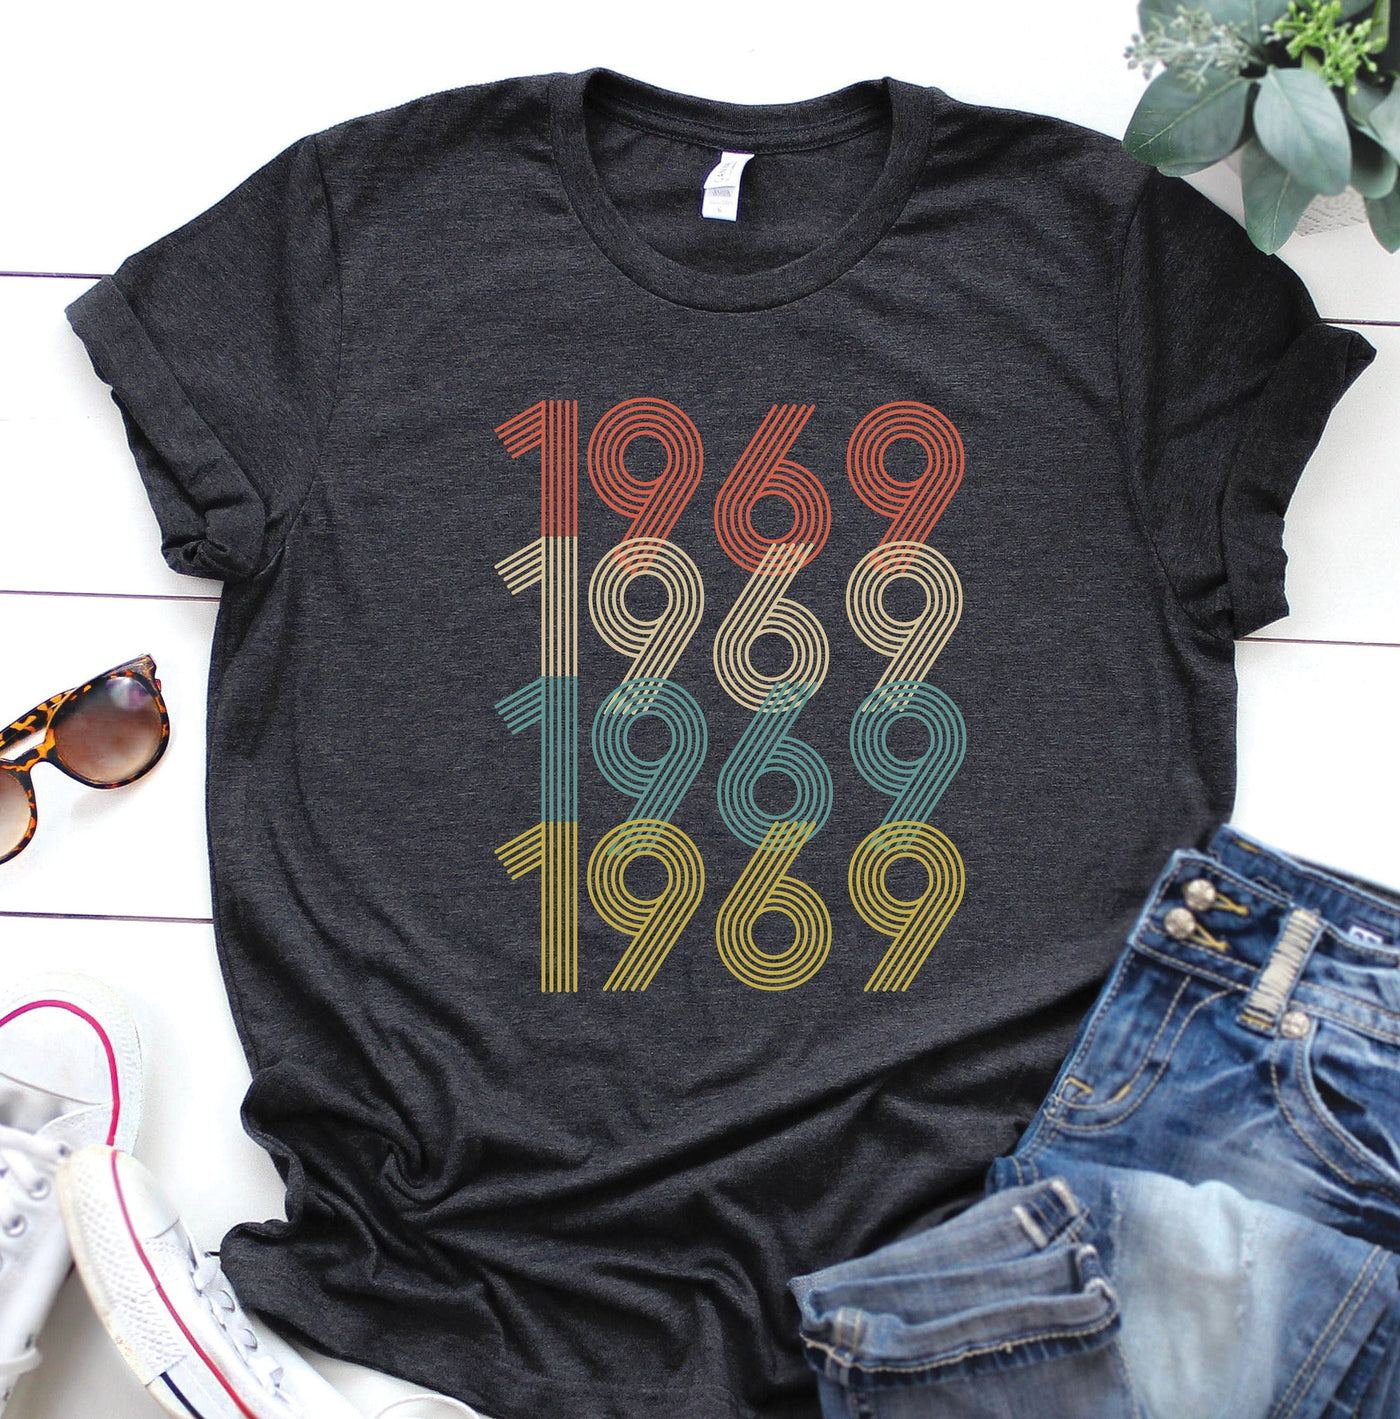 Vintage 1969 Shirt, 54th Birthday, gift for her